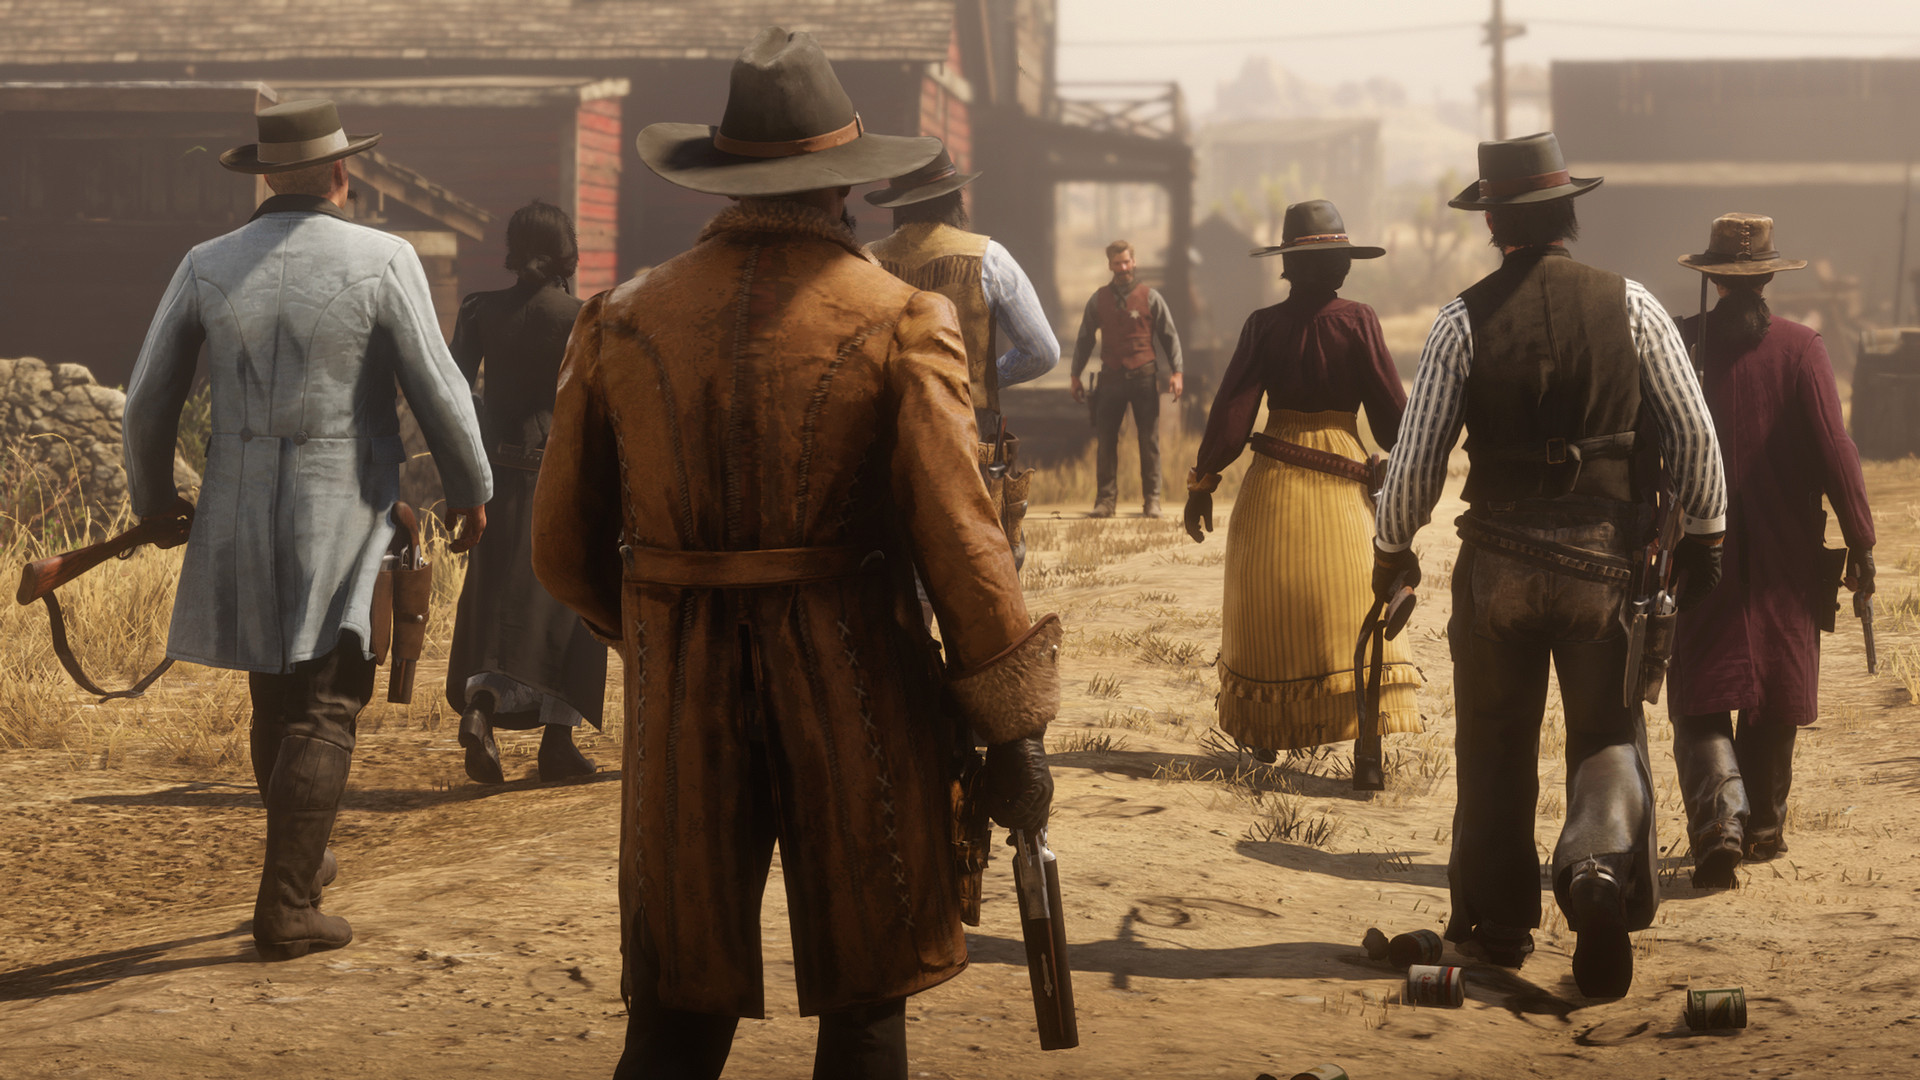 Red Dead Online gets a new game mode